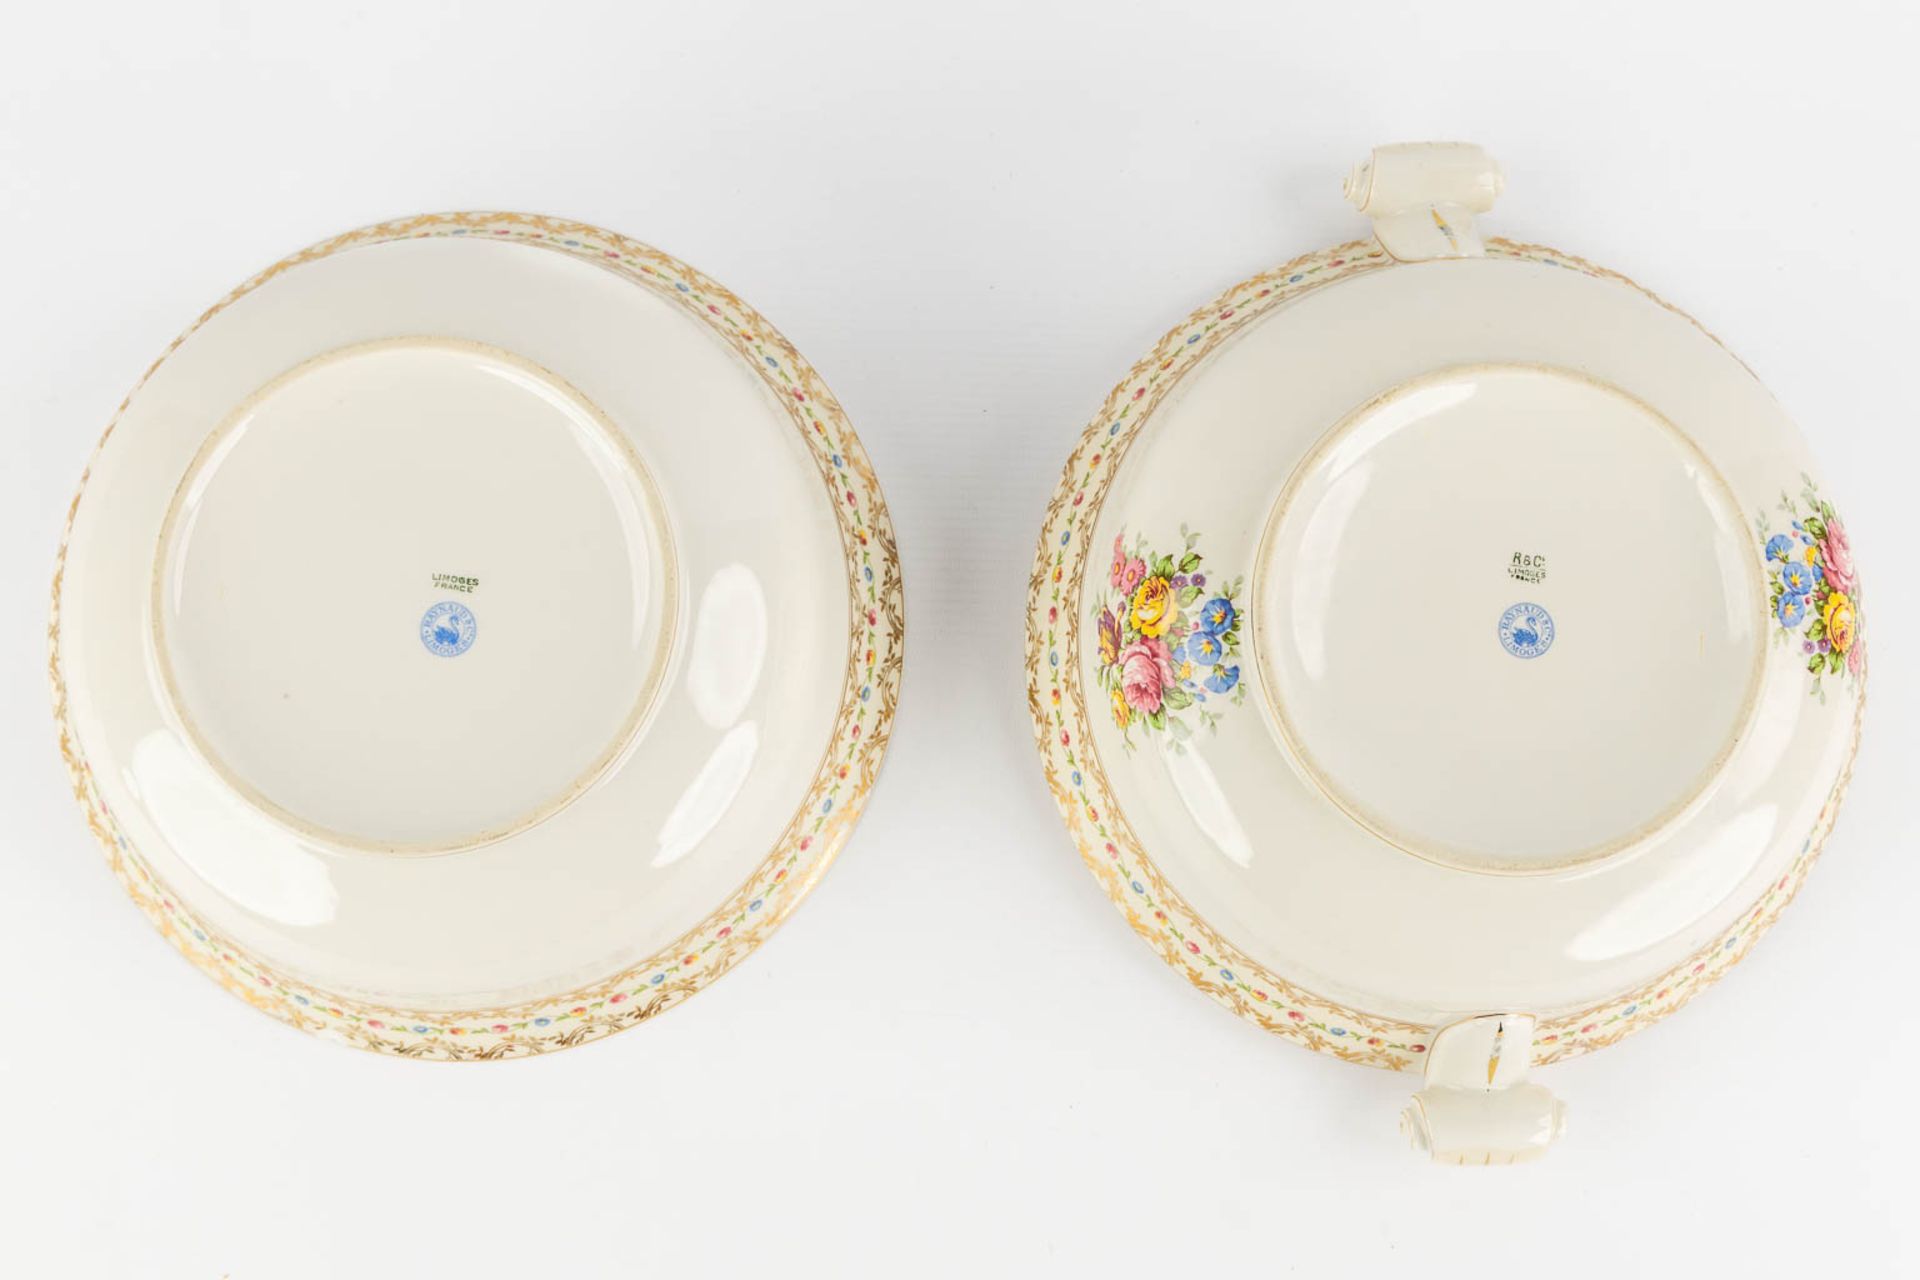 Raynaud, Limoges, a large dinner service. (L:25 x W:35 cm) - Image 16 of 16